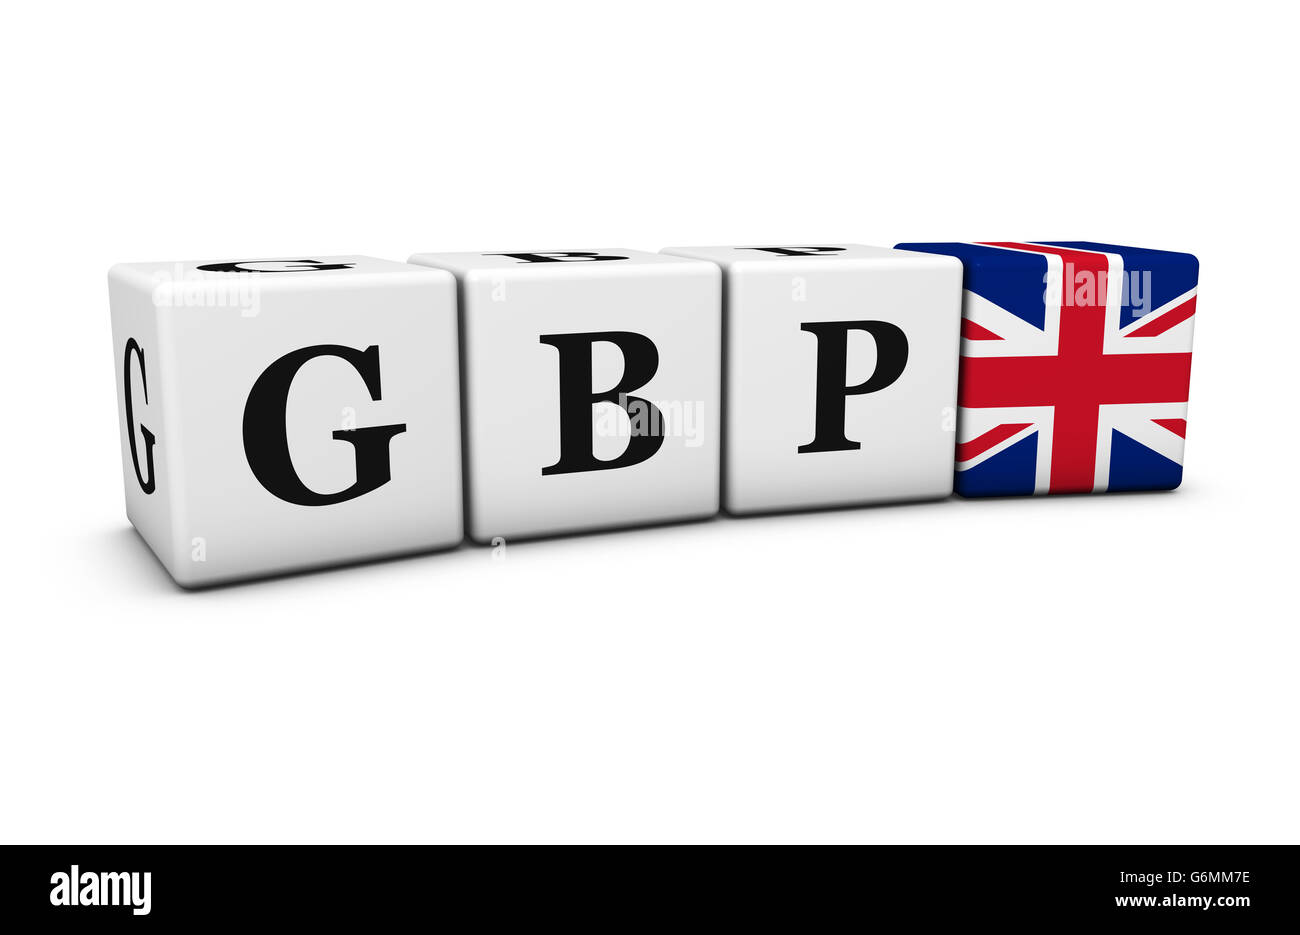 British pound currency exchange market and financial concept with GBP code sign and UK flag on cubes isolated on white. Stock Photo